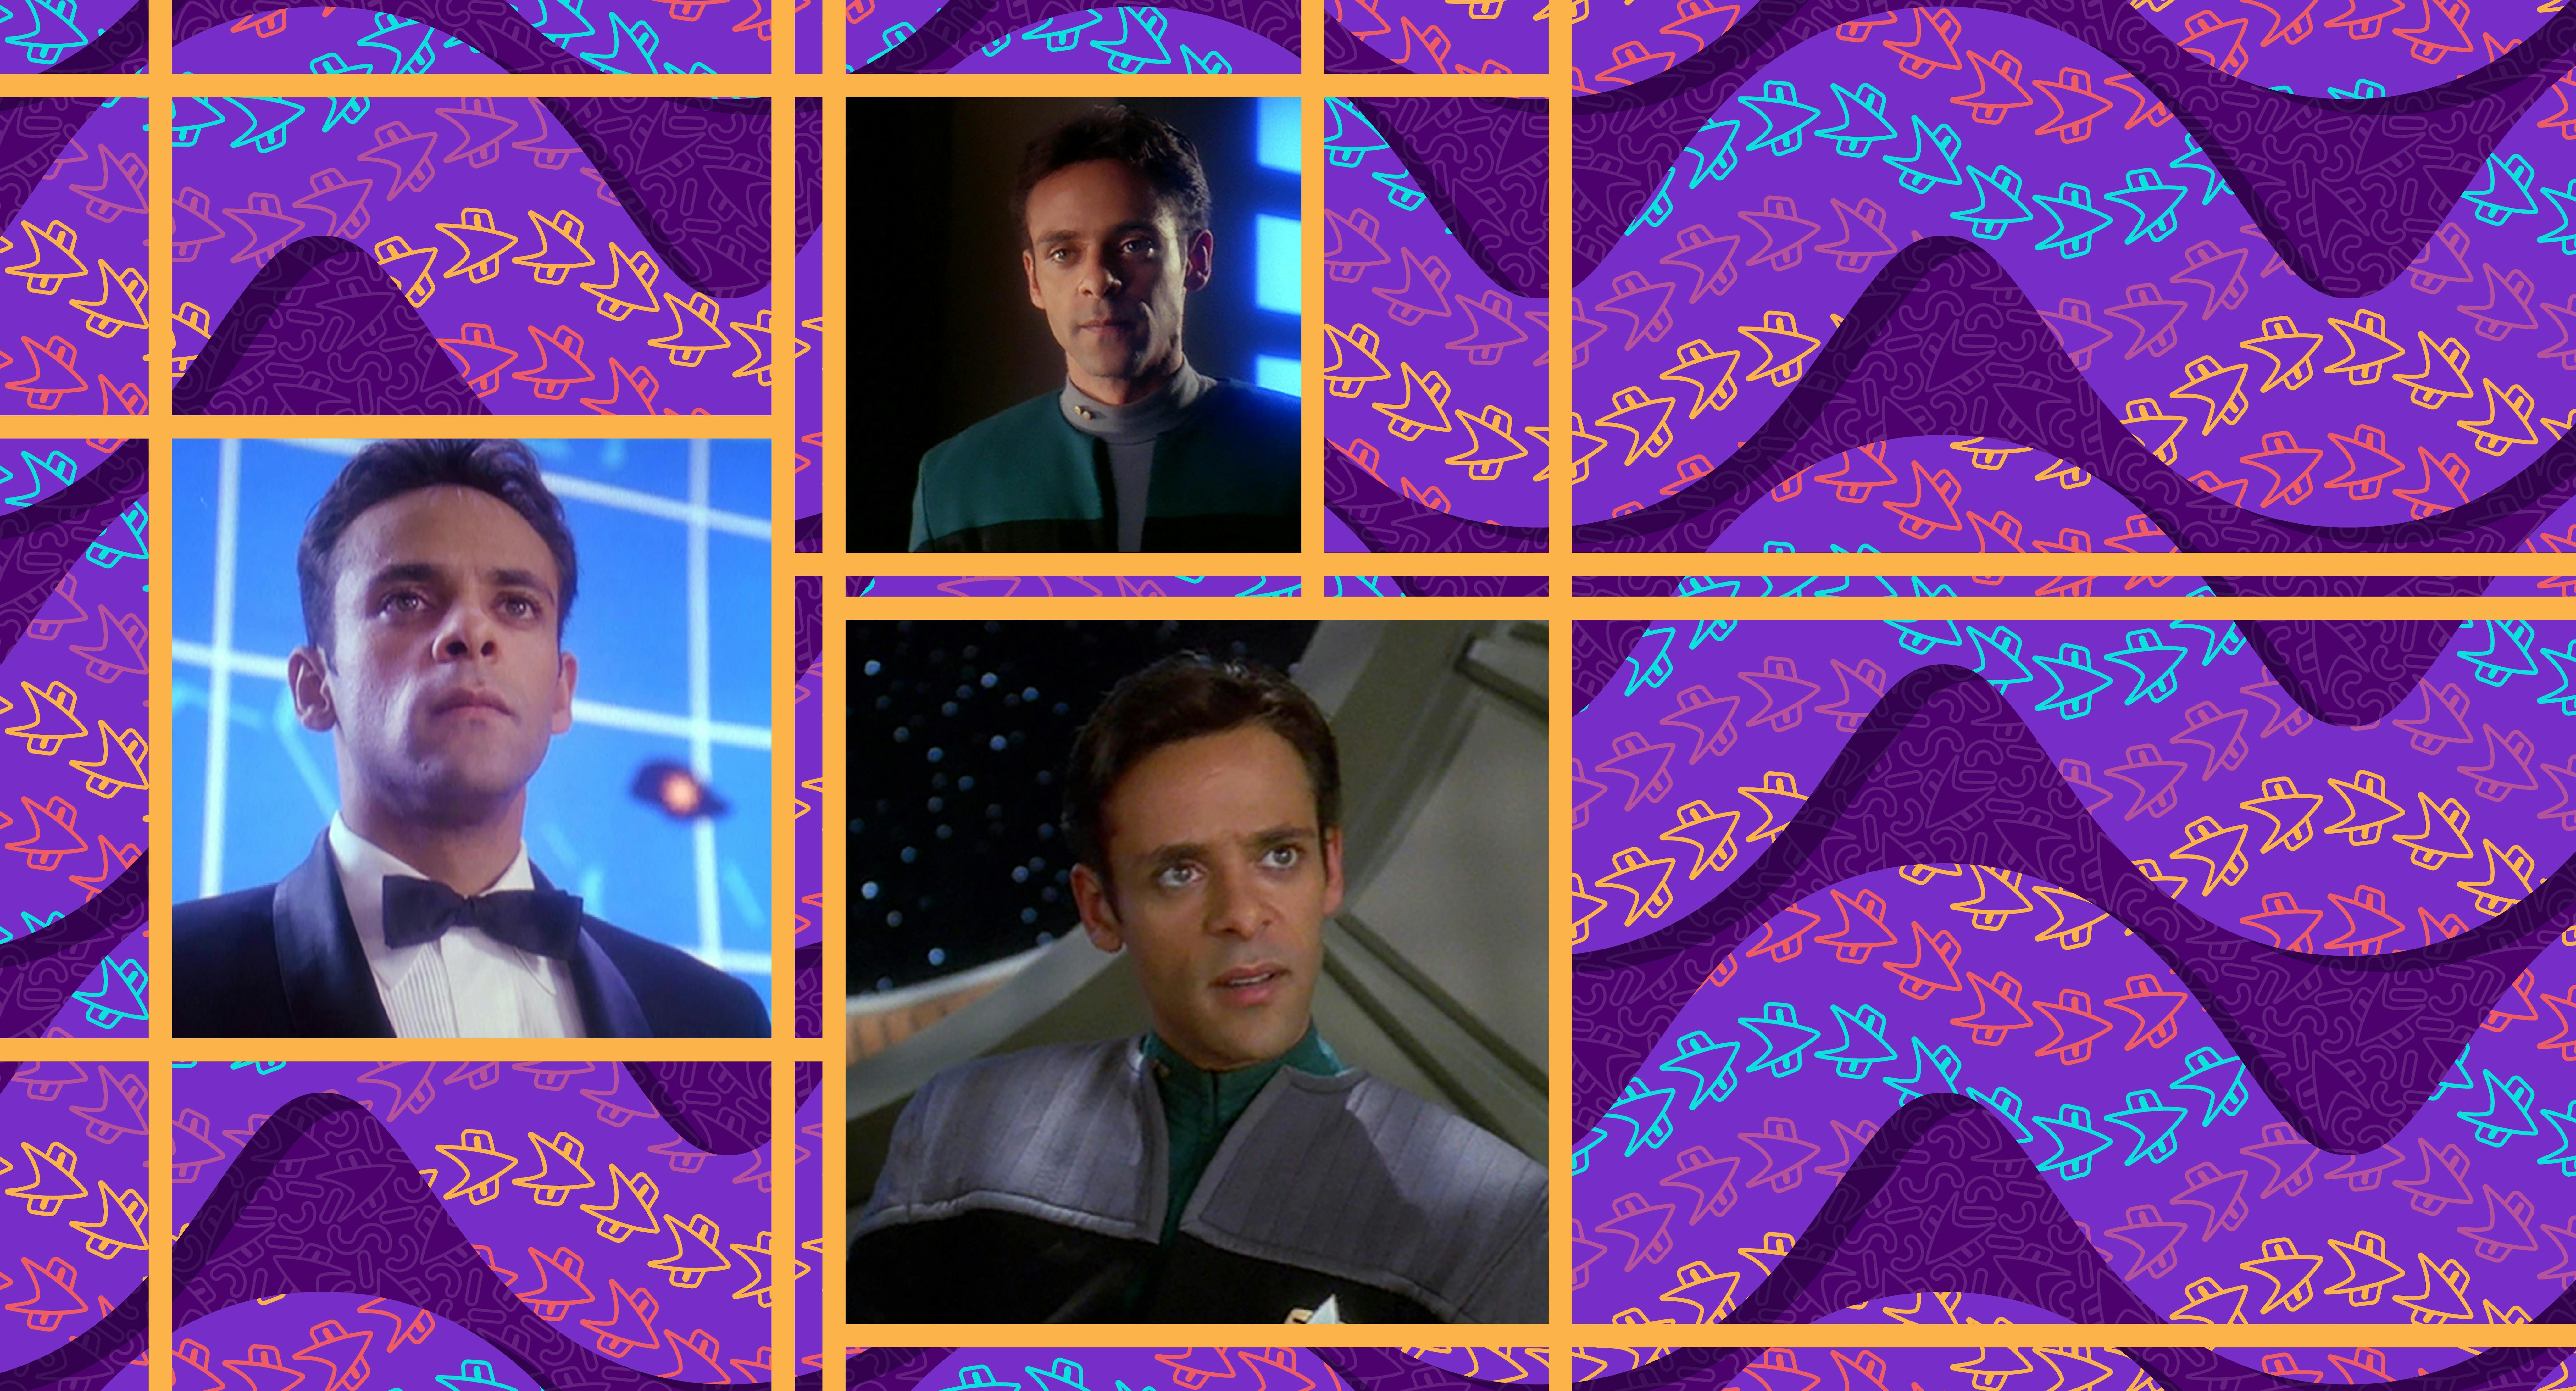 Three images of Dr. Julian Bashir from Star Trek: Deep Space Nine are against a purple background.